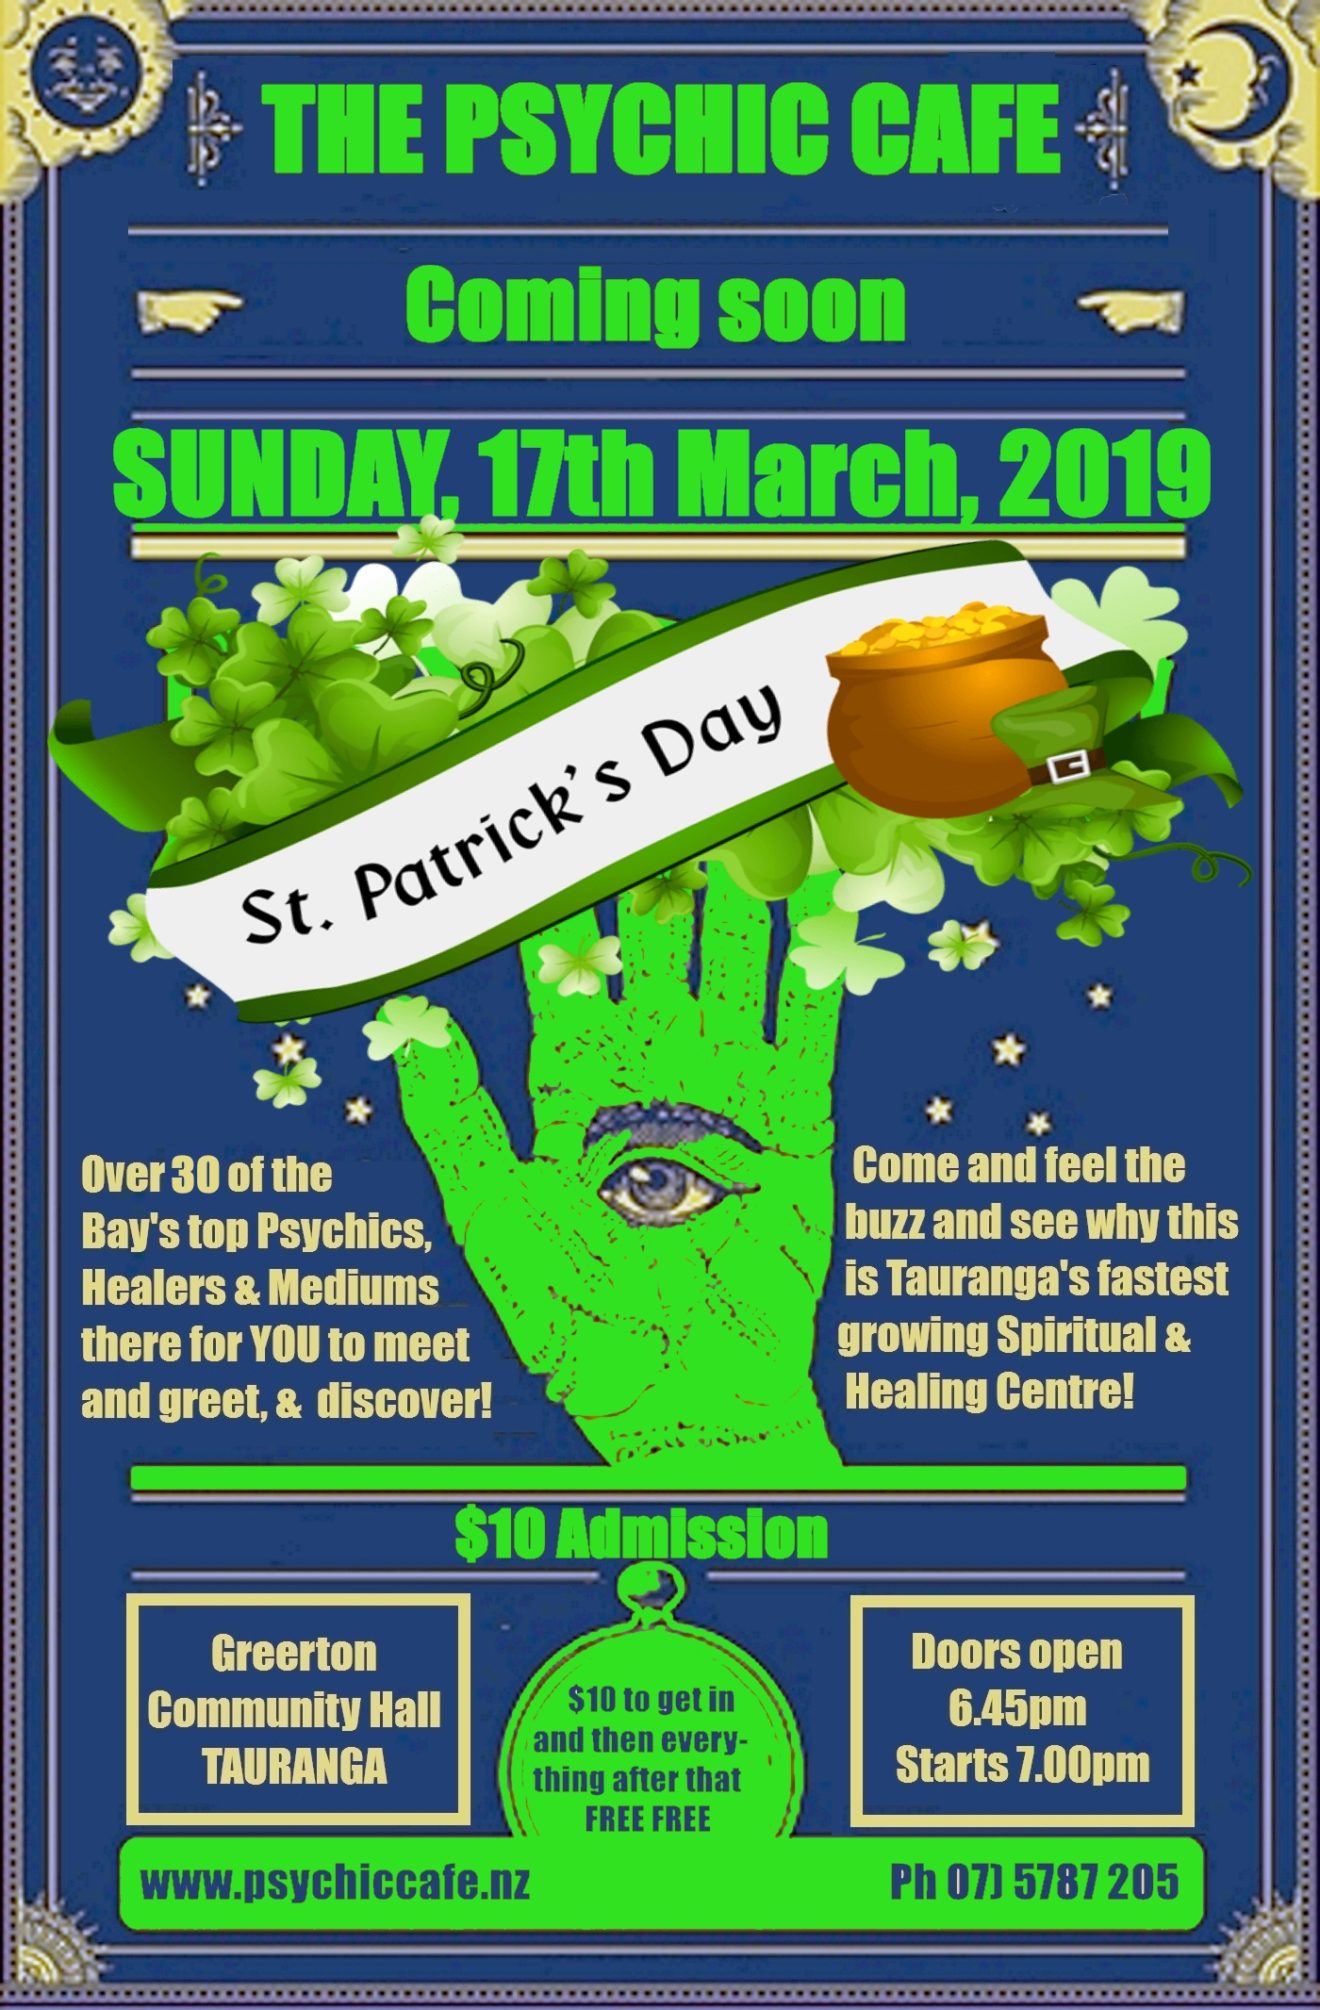 Next Psychic Cafe meets St Paddy's Day - 17th March, 2019!